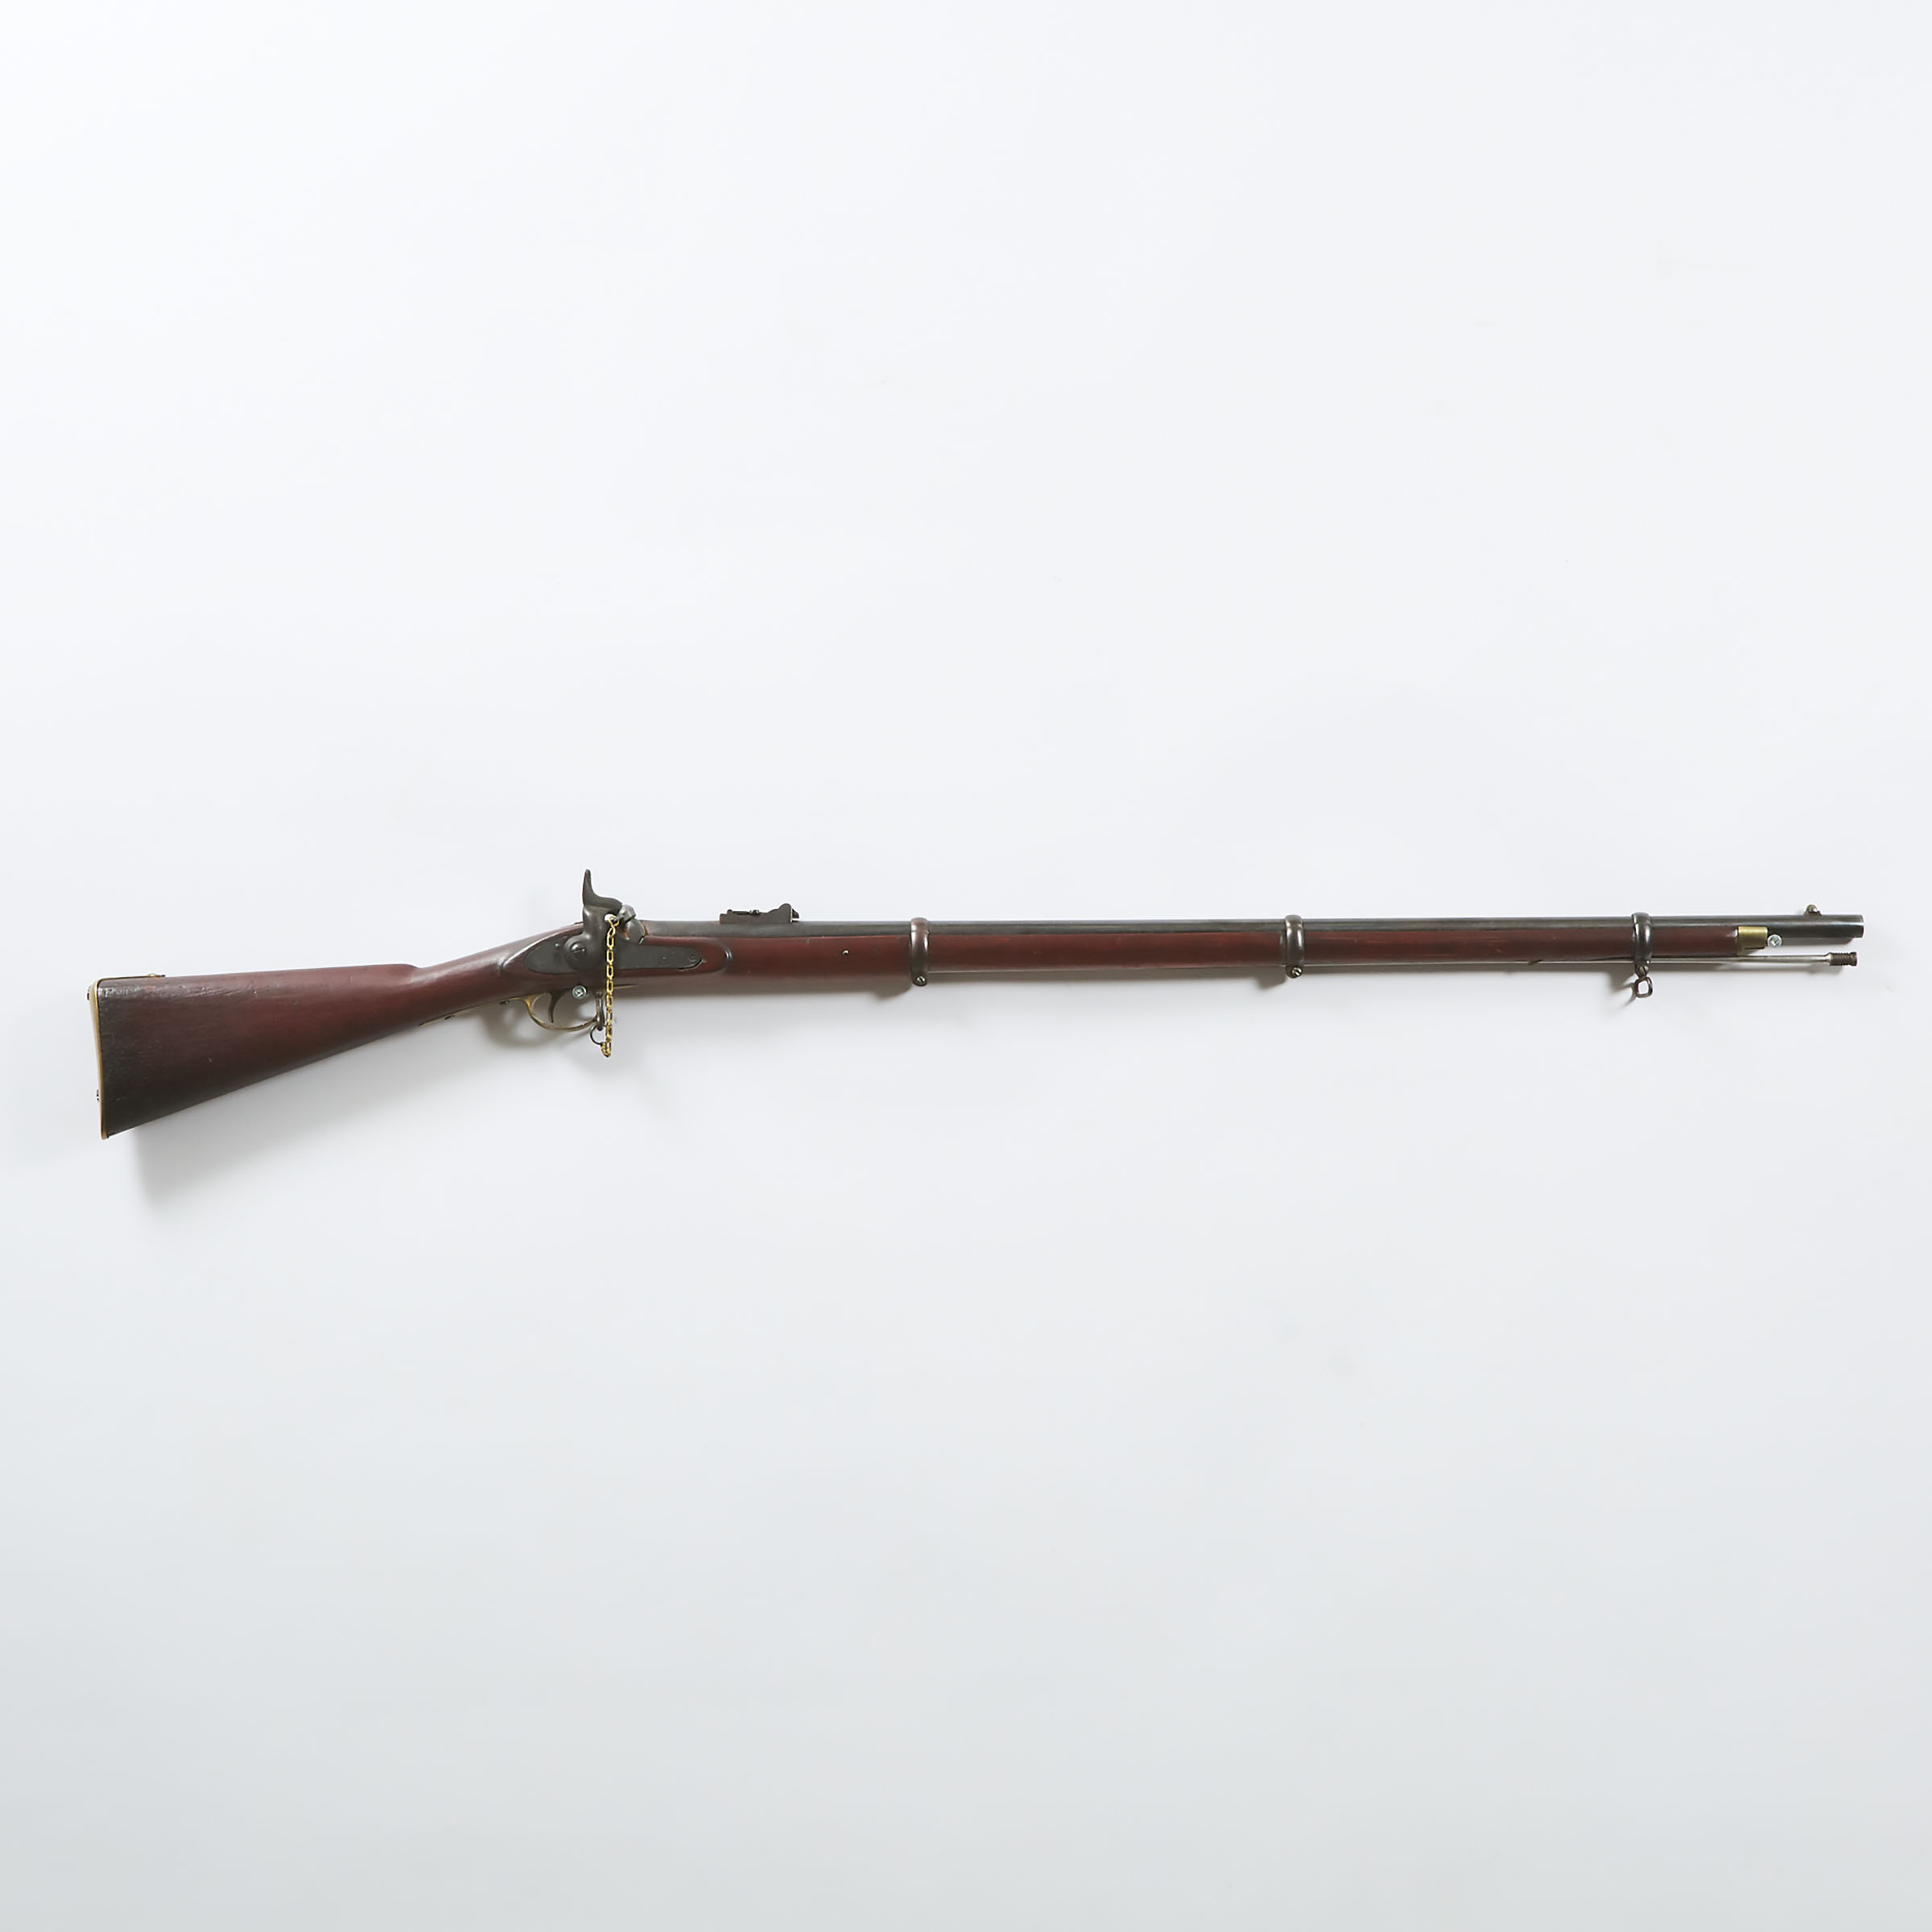 Enfield Percussion Cap Rifle 1862 3abed6